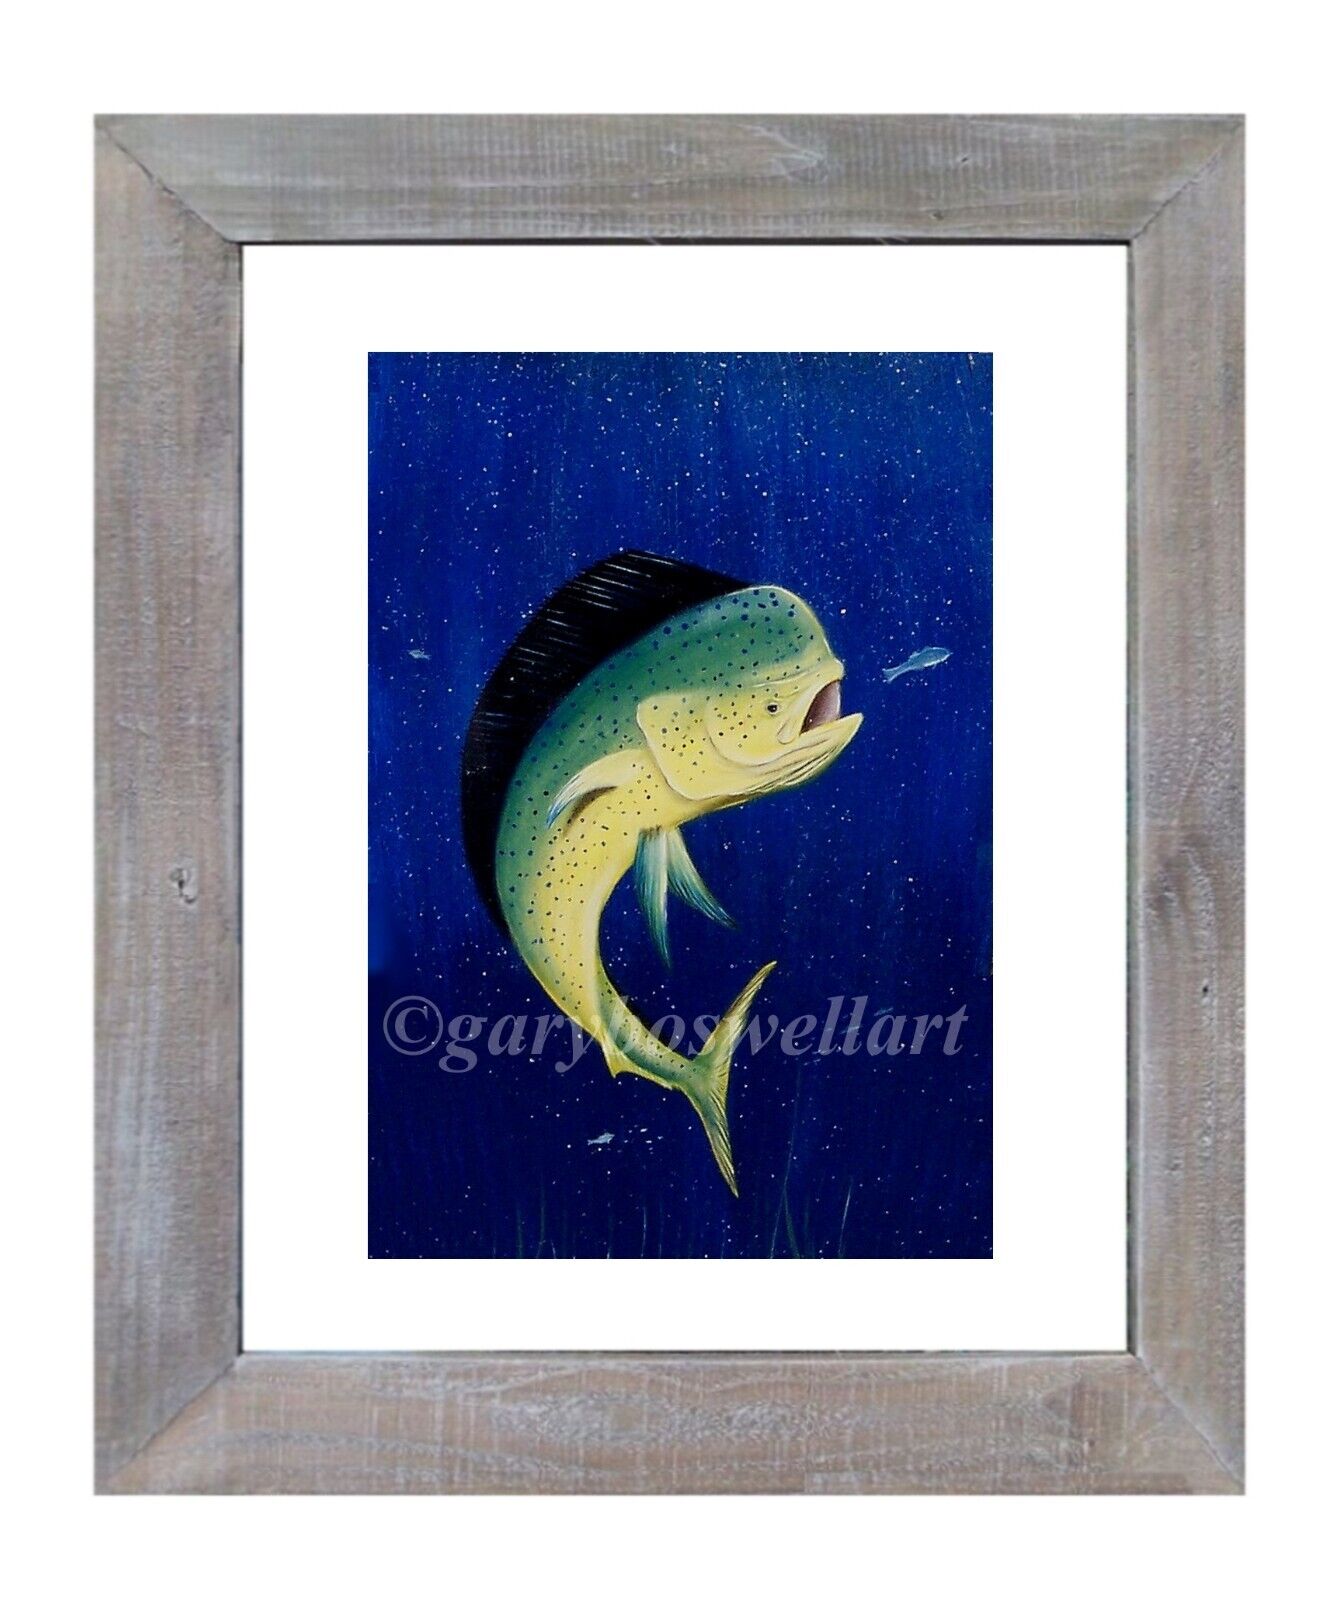 Dolphin fish in deep blue ocean S/N limited edition signed framed mahi wall art